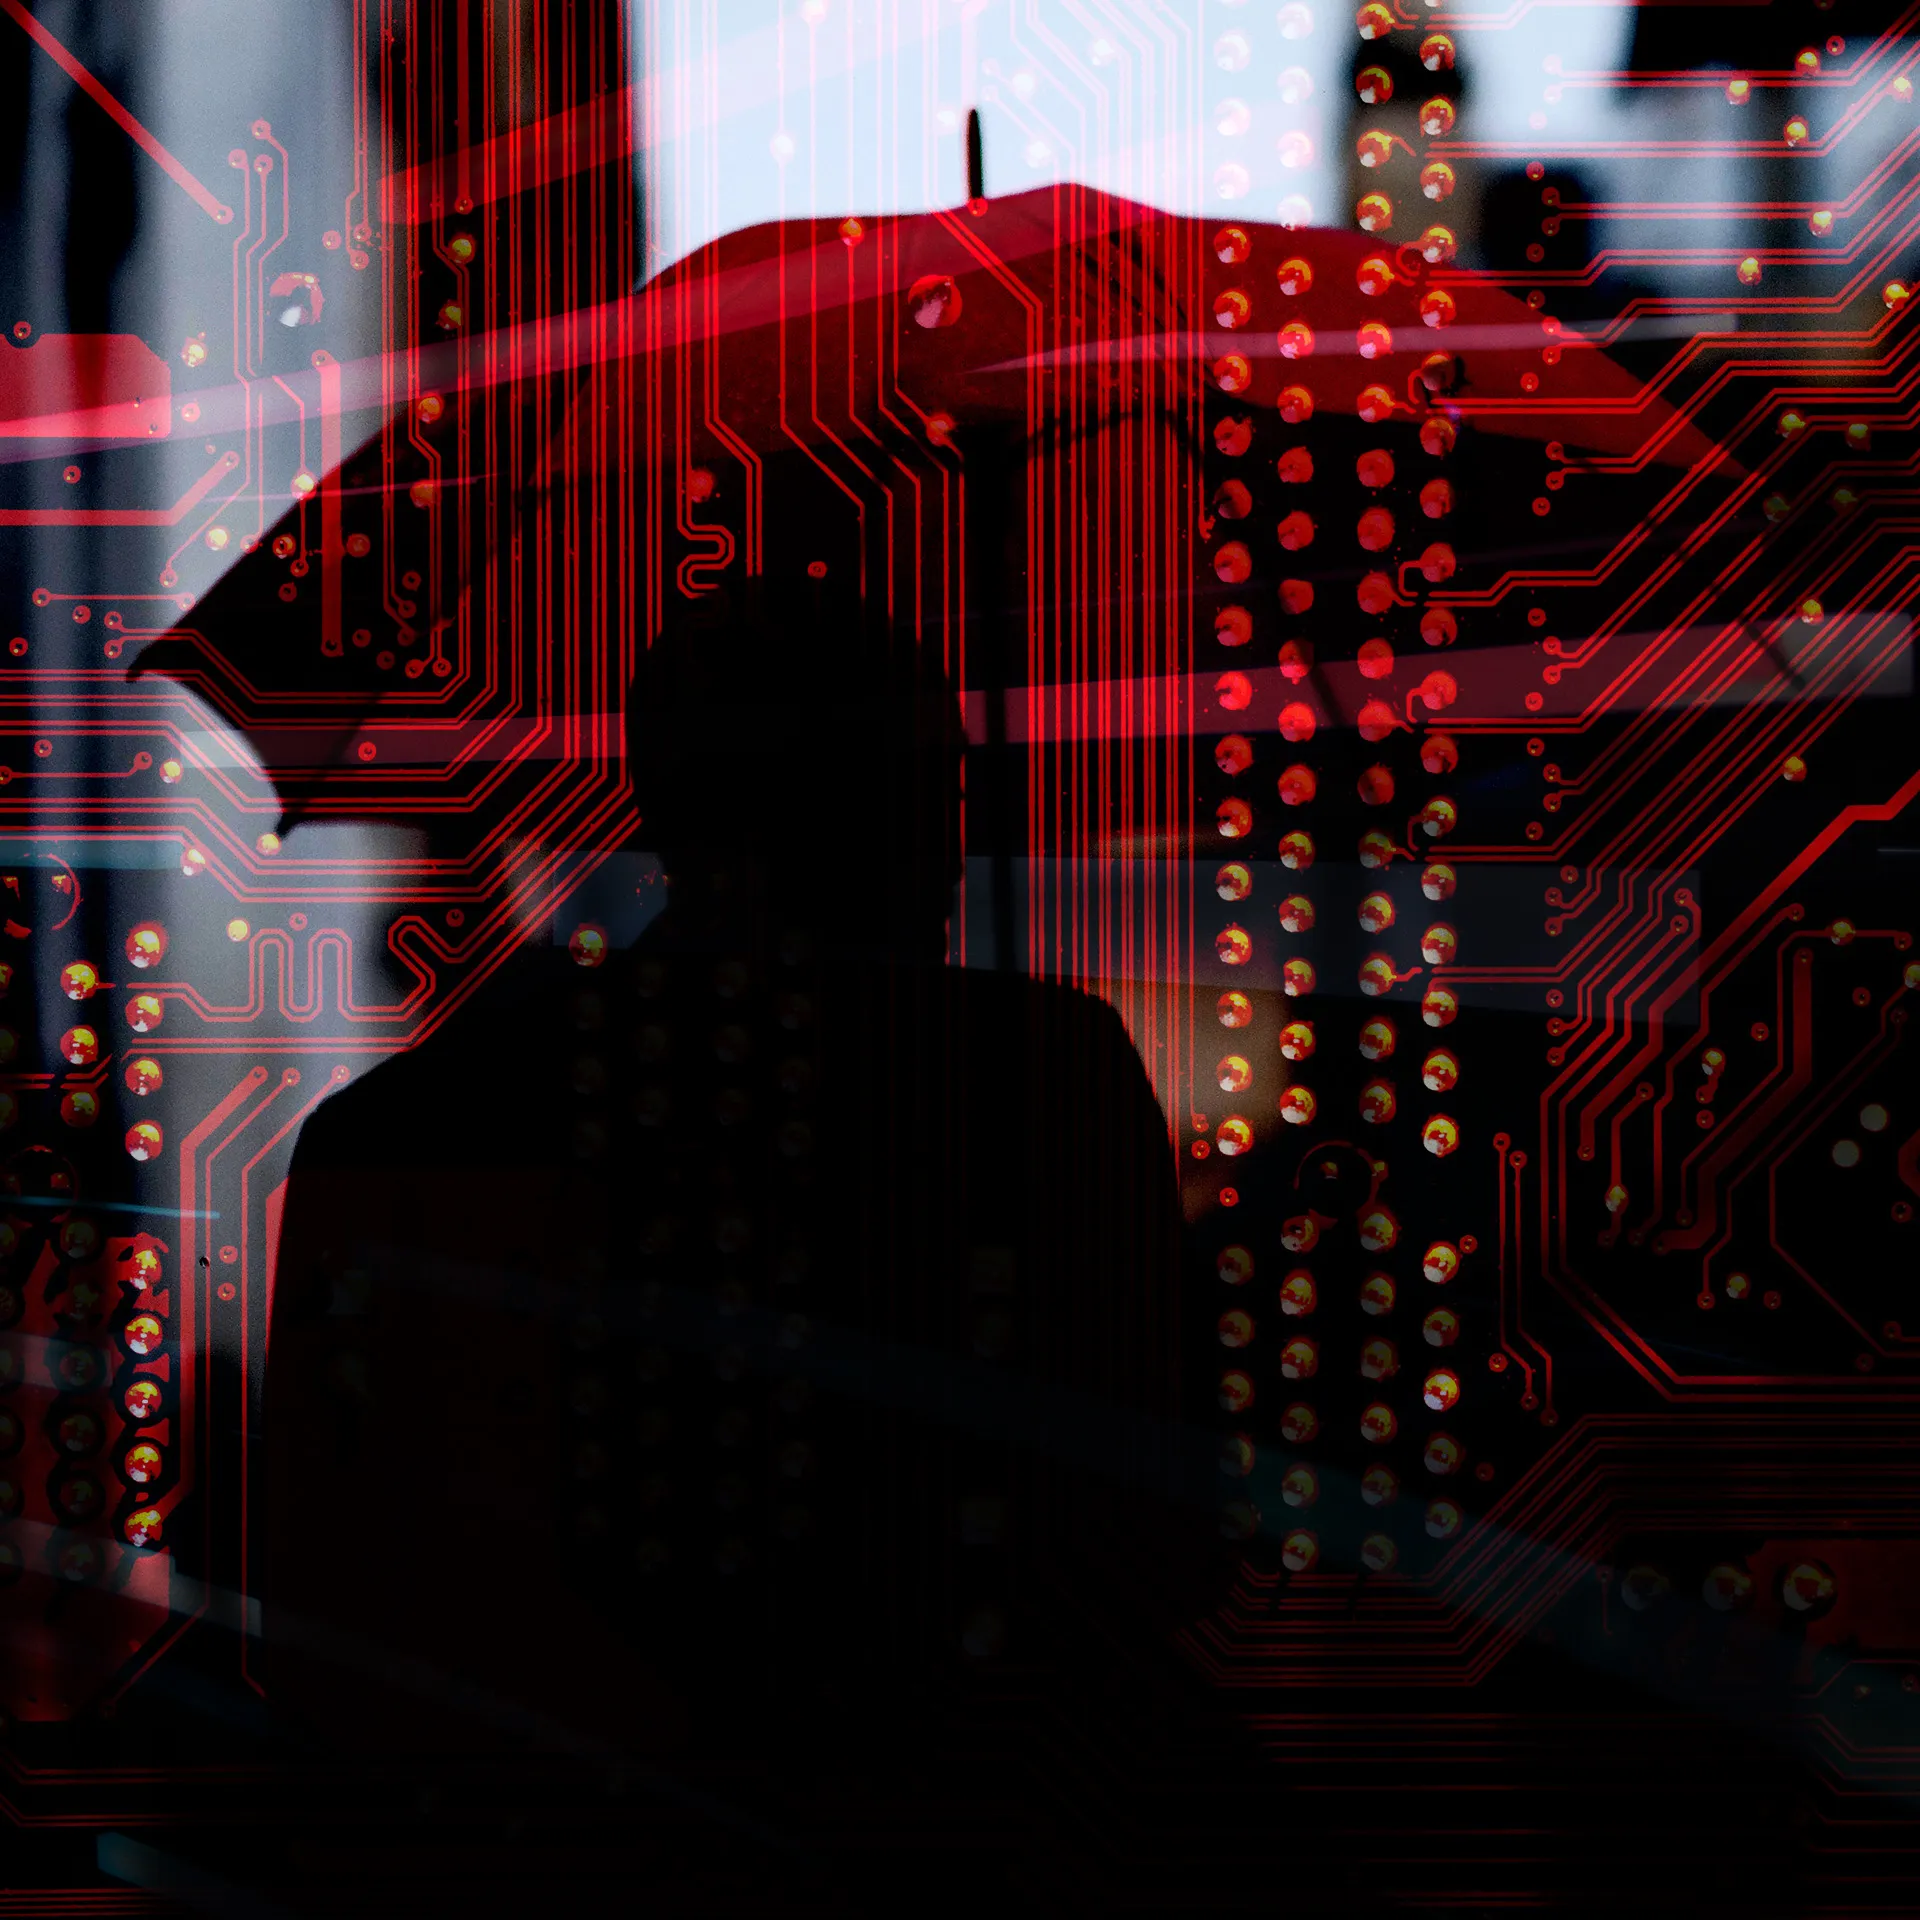 Silhouetted person with umbrella on red and black circuit board